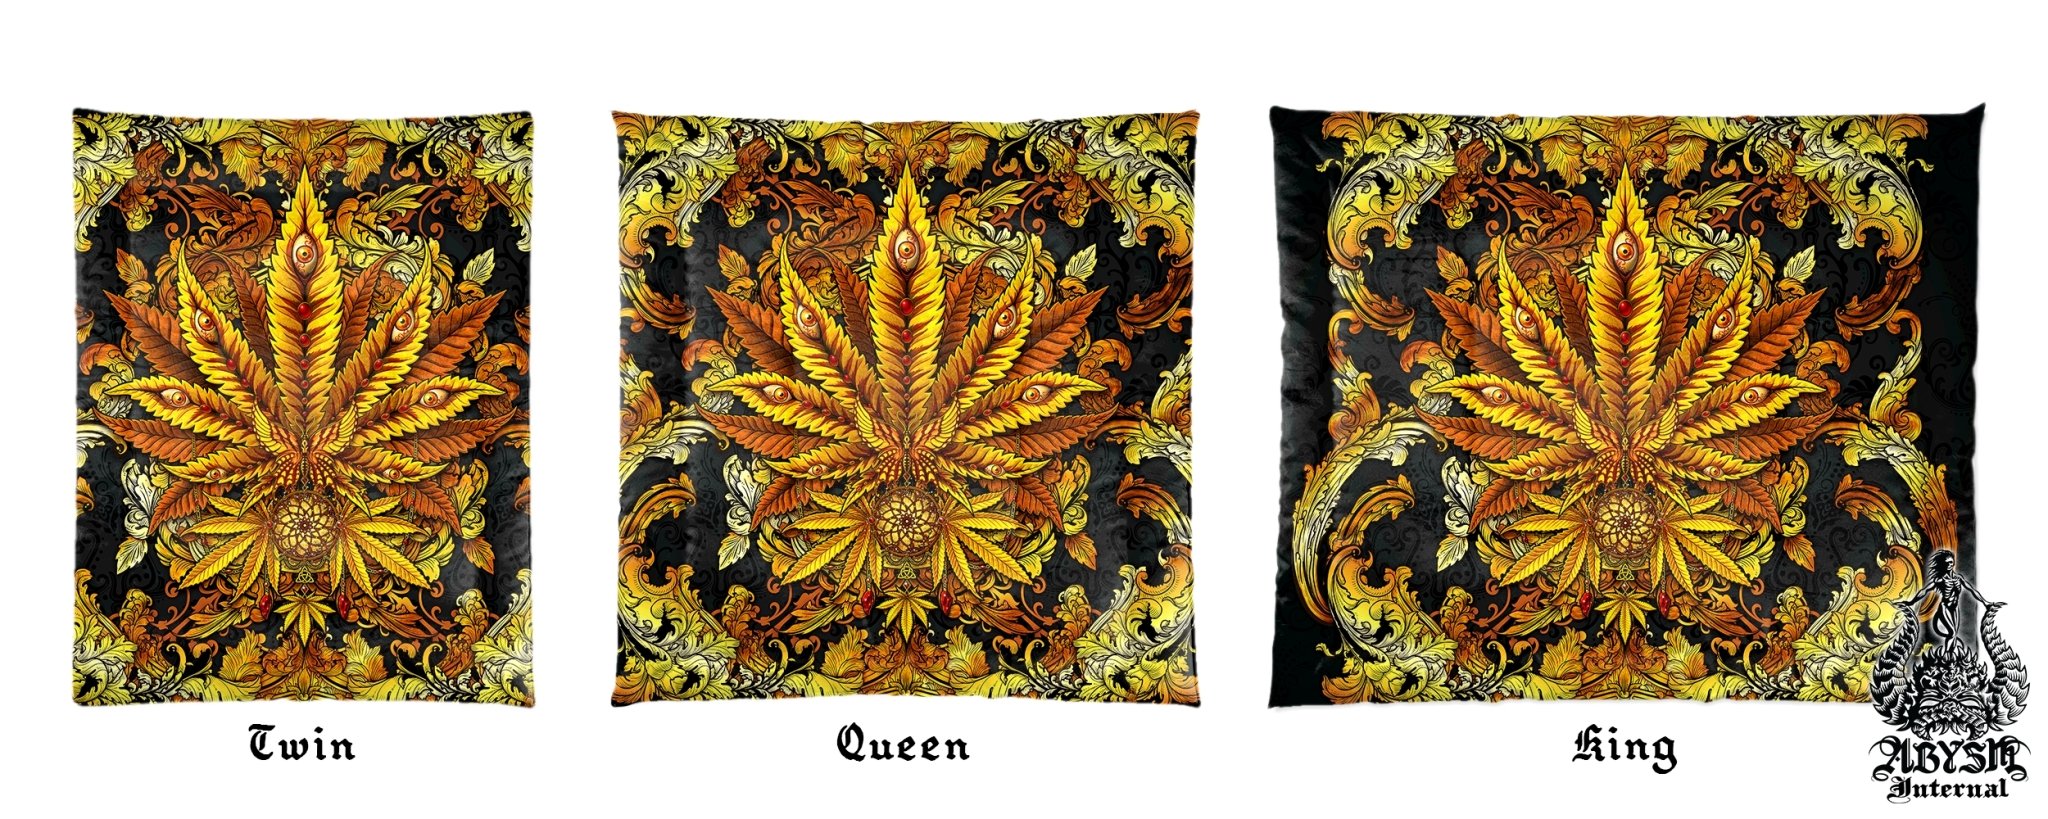 Weed Bedding Set, Comforter and Duvet, Cannabis Bed Cover, Marijuana Bedroom Decor, King, Queen and Twin Size, 420 Room Art - Gold - Abysm Internal